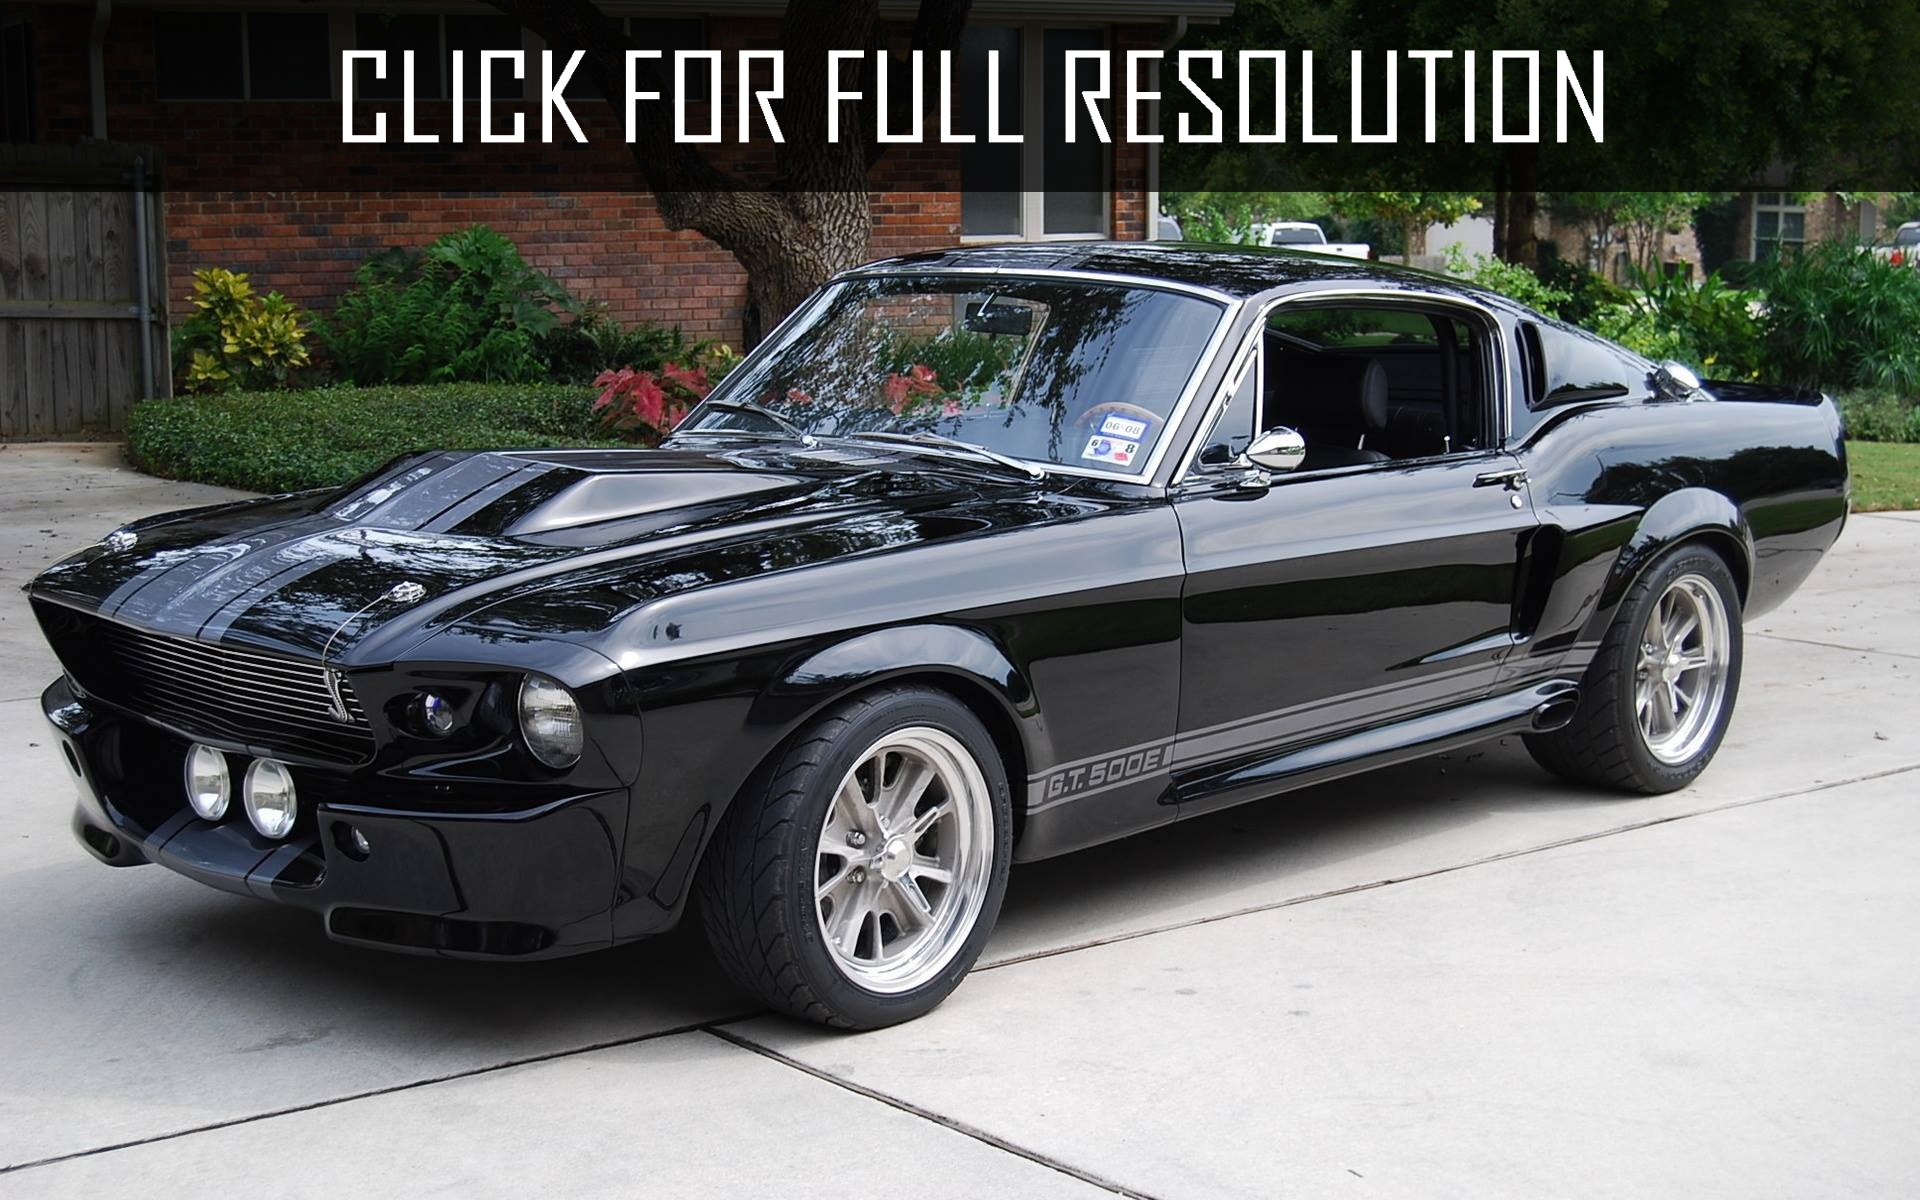 1967 Ford Mustang Shelby Gt500 Best Image Gallery 1212 Share And